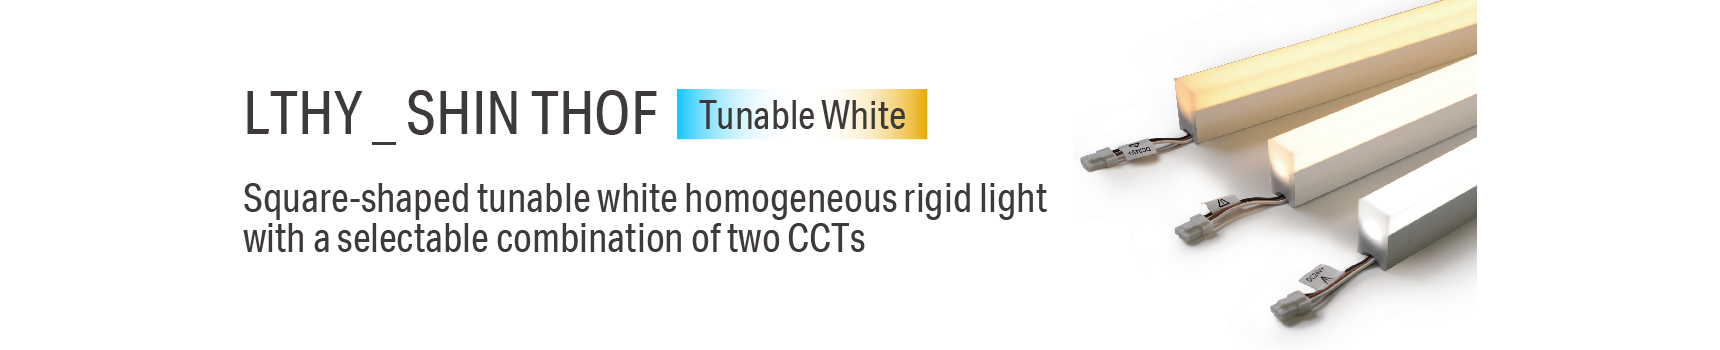 LREY _ SHIN RECTA Square-shaped tunable white homogeneous rigid light with a selectable combination of two CCTs